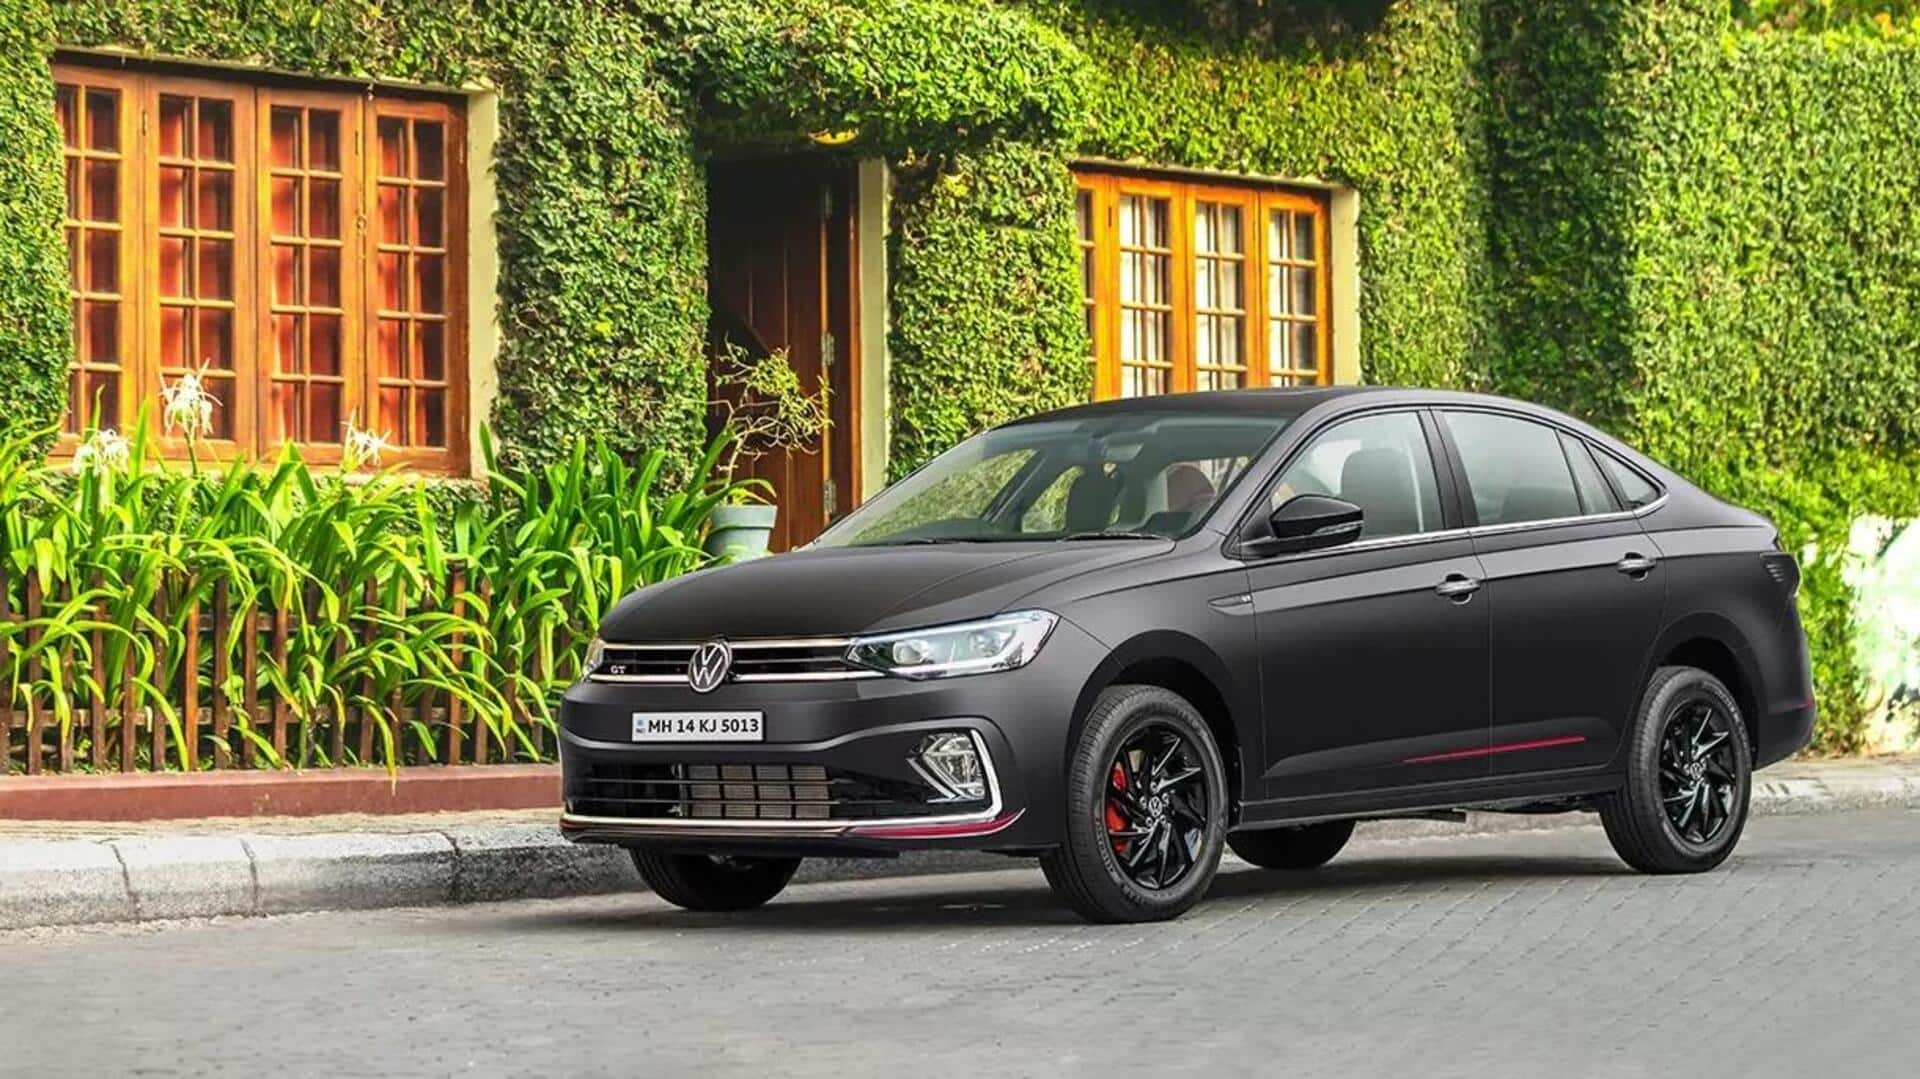 Volkswagen updates Virtus with a new color scheme in India